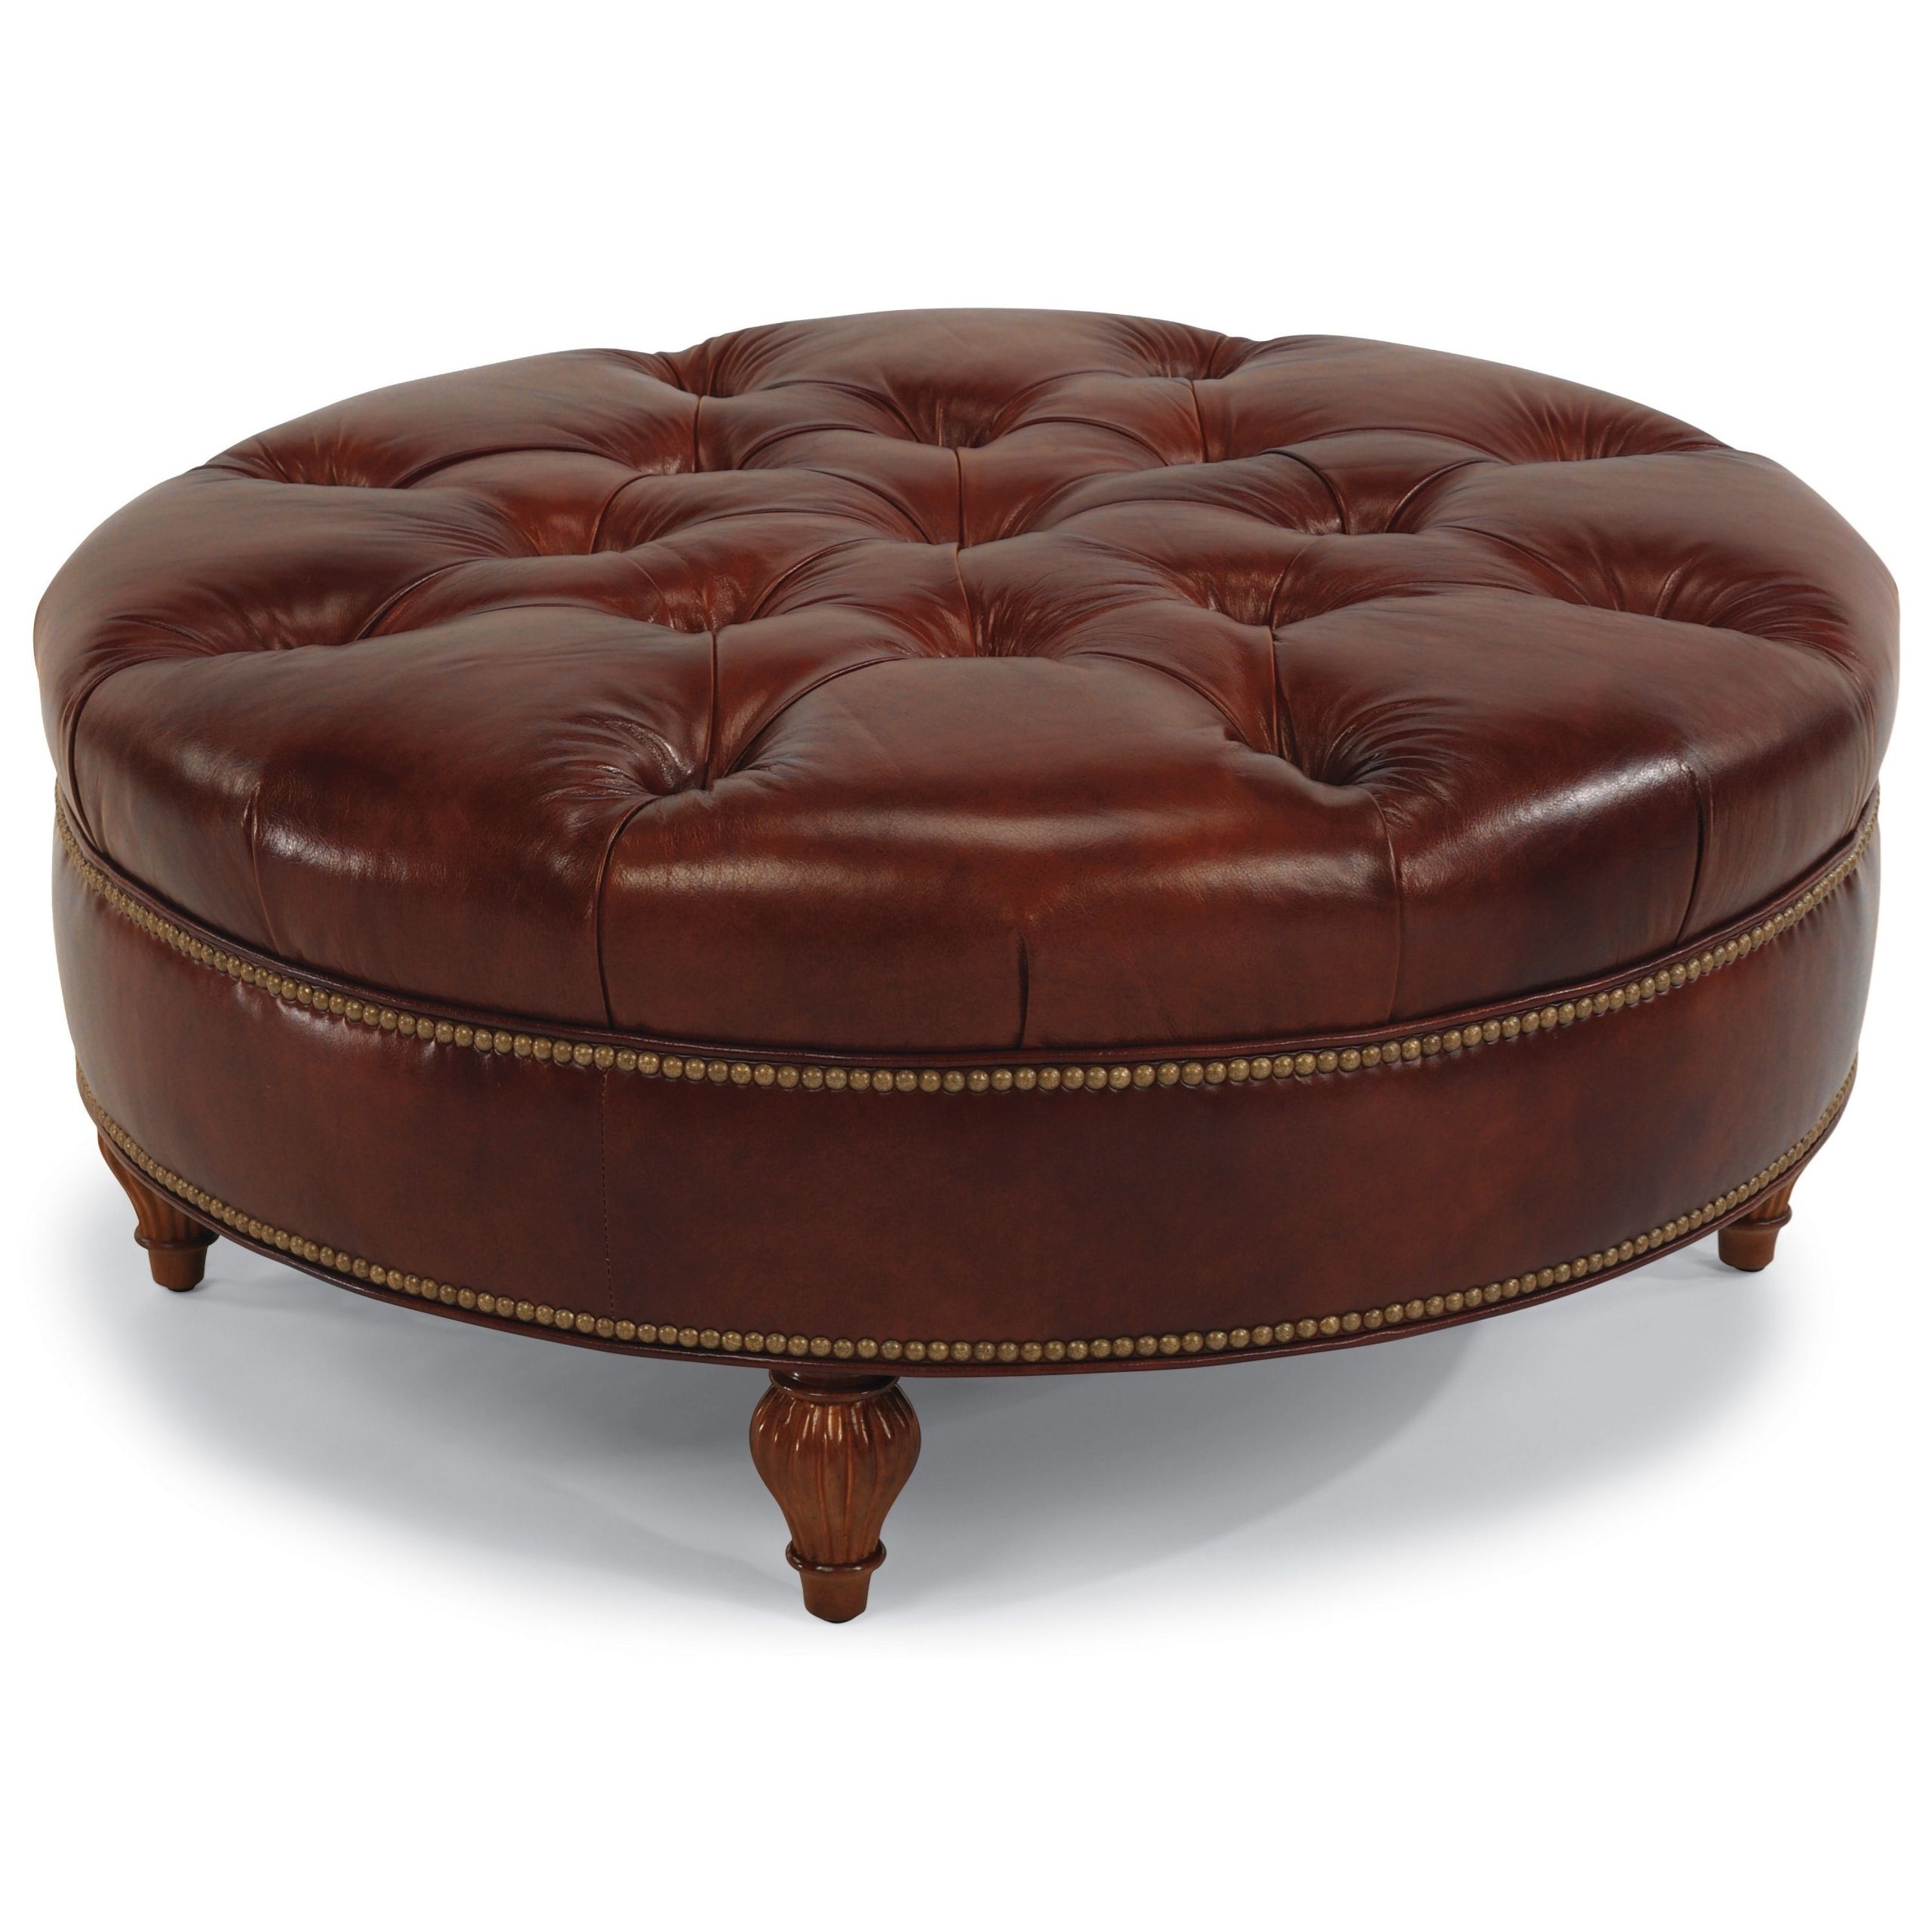 Round Tufted Leather Ottoman – Ideas On Foter Pertaining To Leather Pouf Ottomans (View 6 of 20)